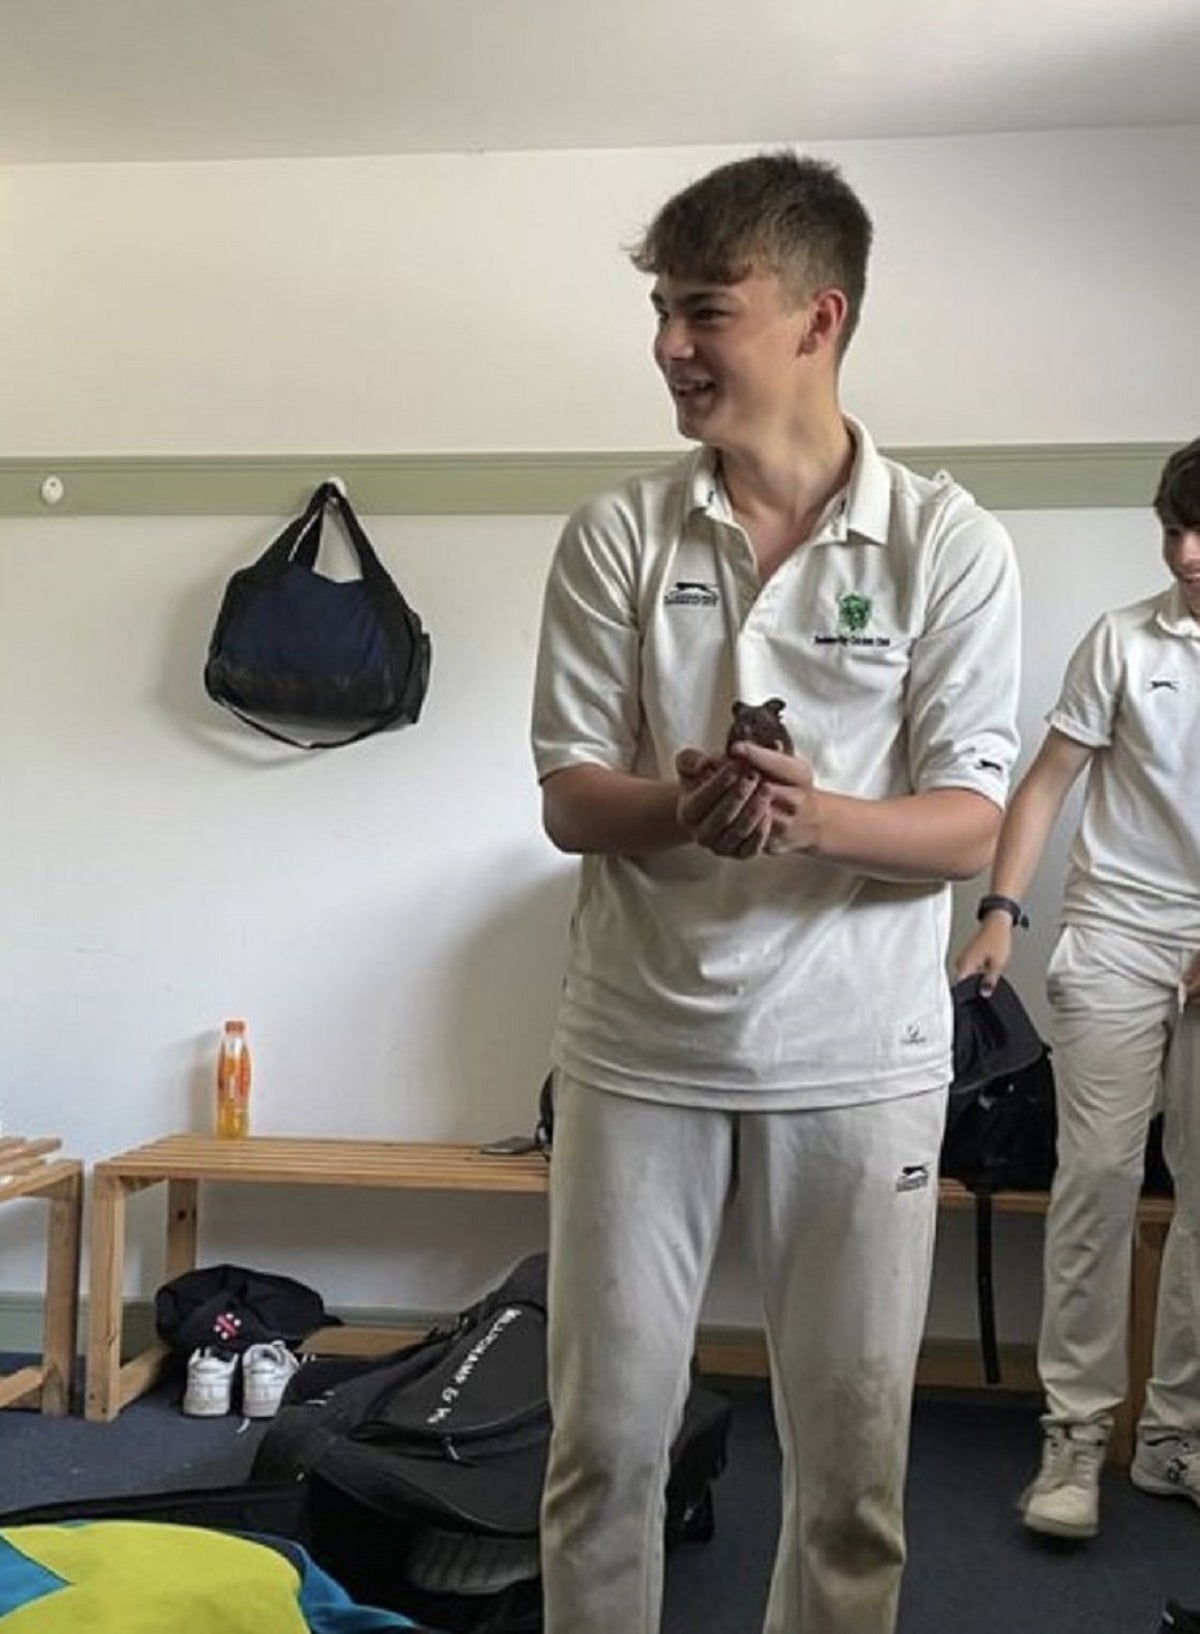 Young cricketer finds furry surprise before cricket match